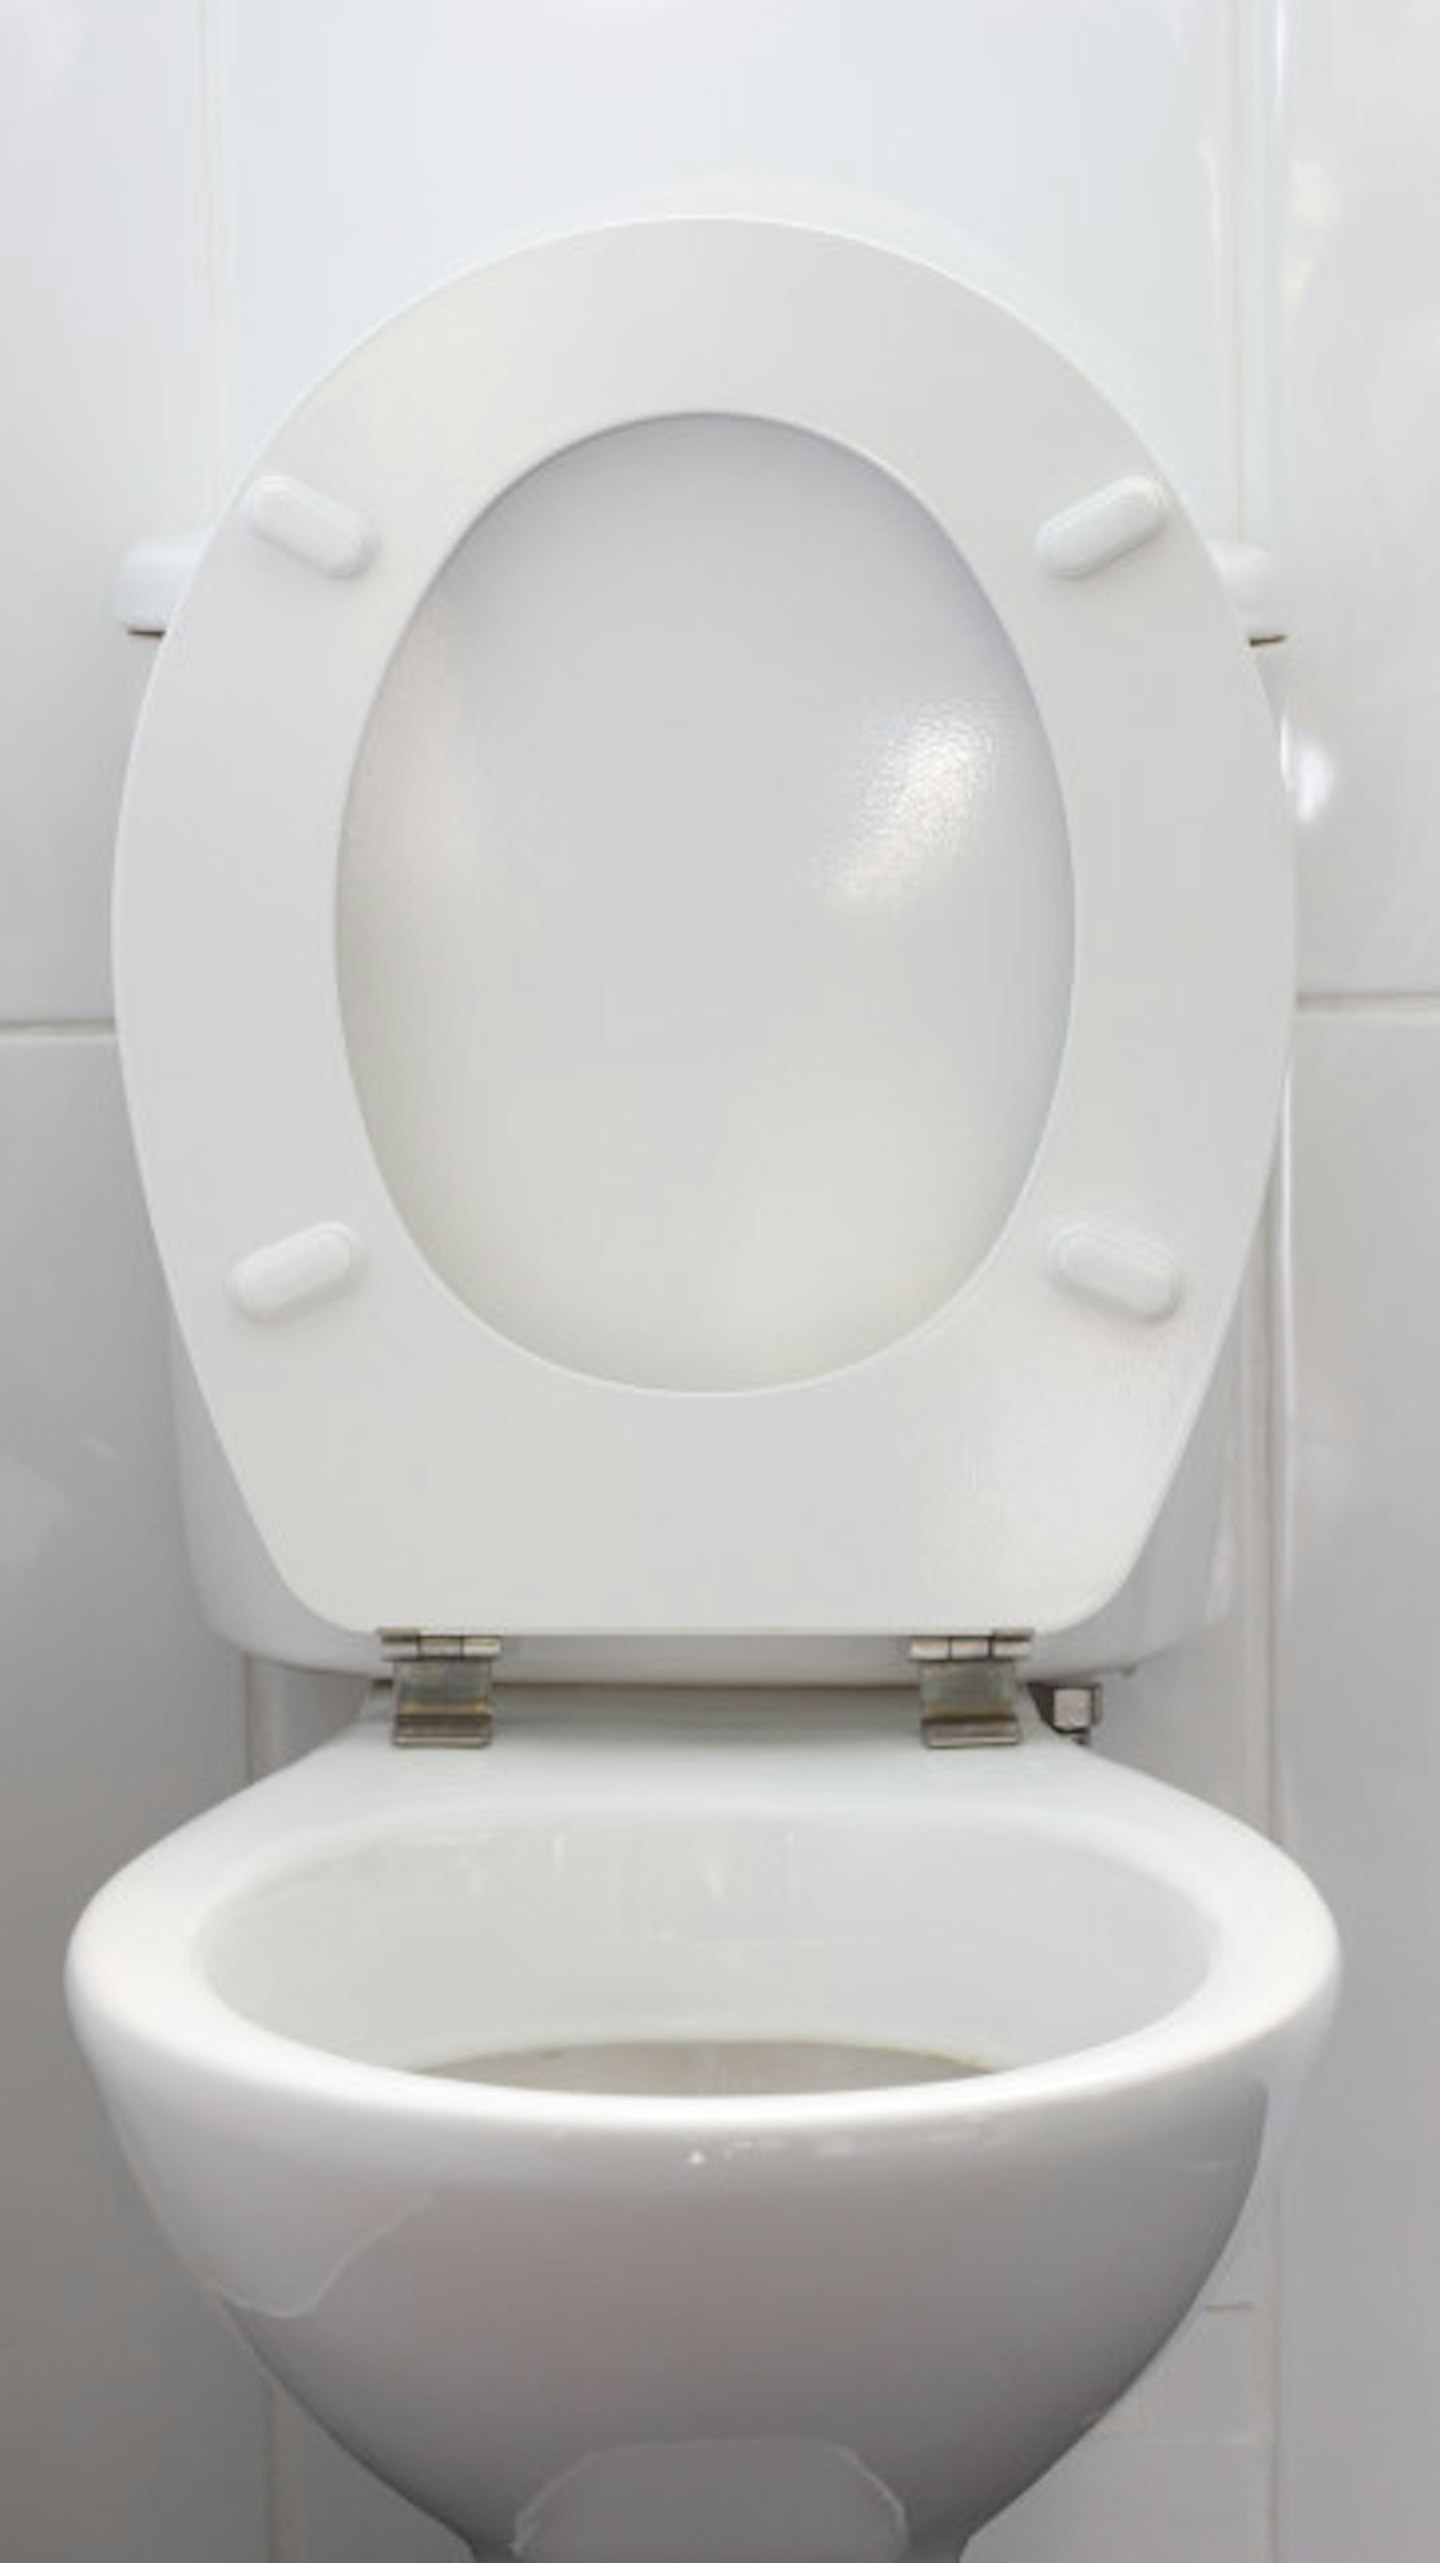 The youngster had a phobia of using the toilet (Stock image)